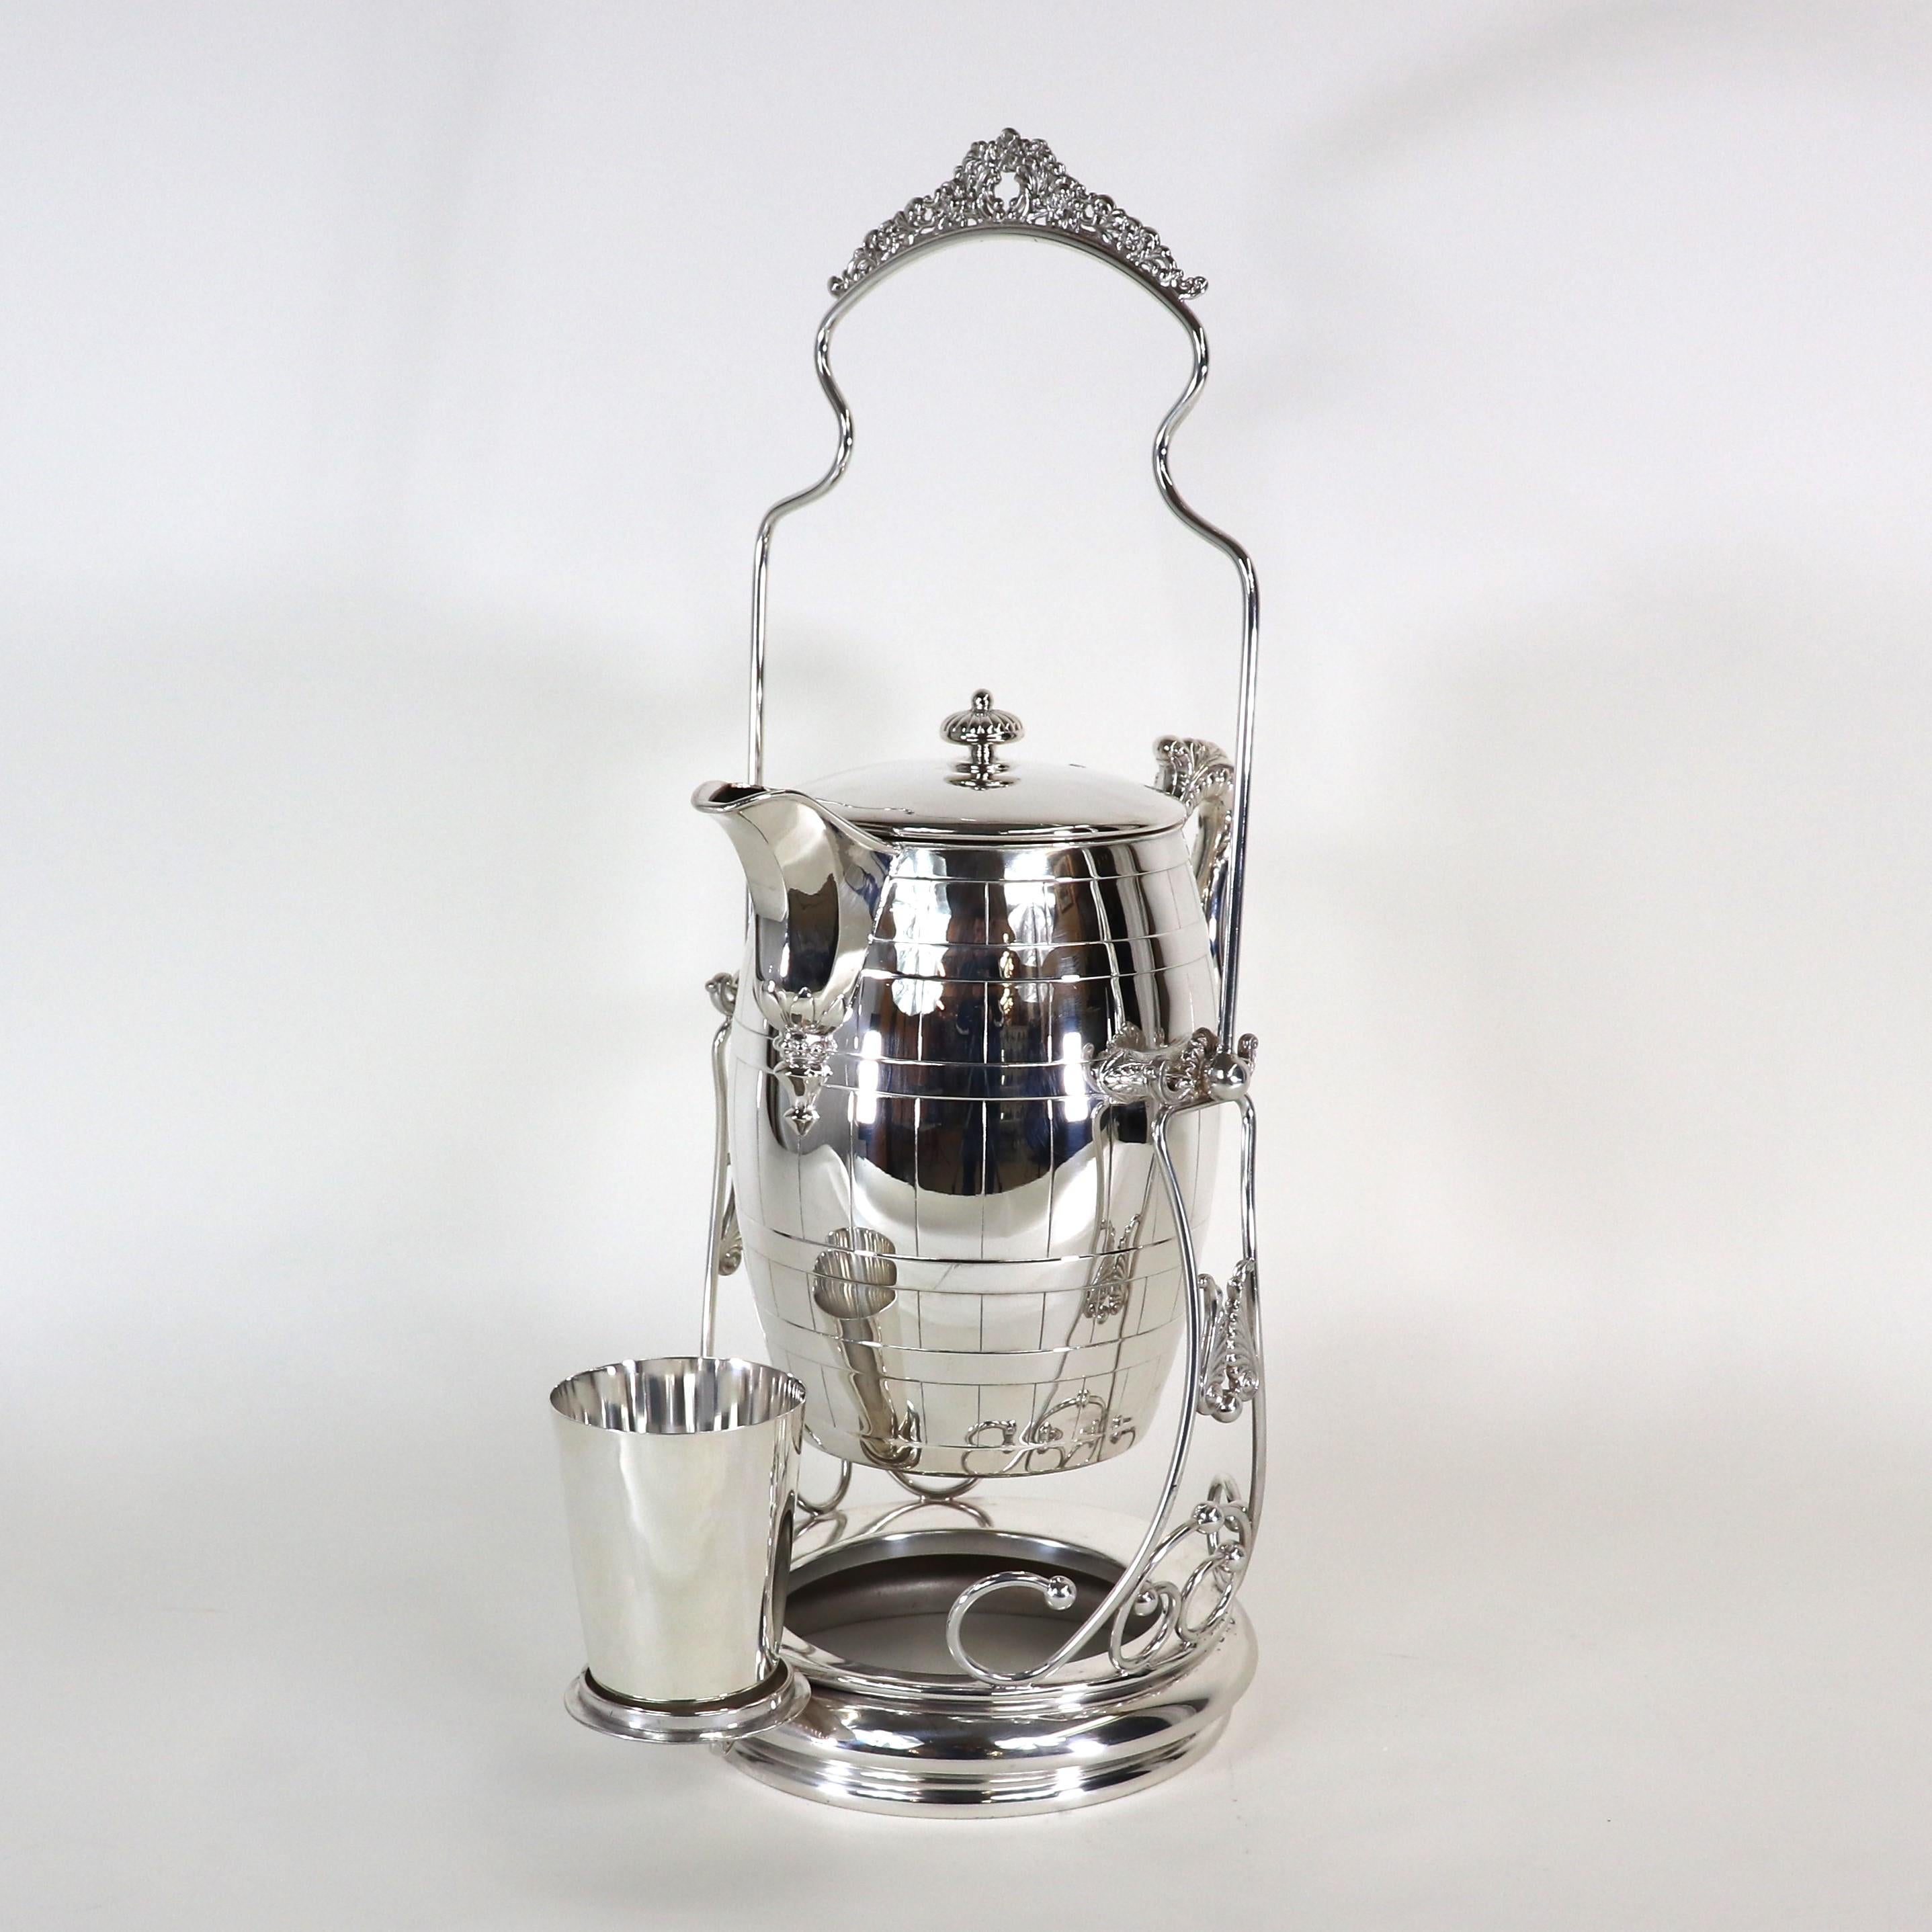 Serve any beverage of your choice with elegance with this silver-plated decanter beverage pitcher jug drink cask by the Standard Silver Company of Toronto Canada. The ten-cup set comes with a stand, pitcher, and slop cup. The inside has a porcelain